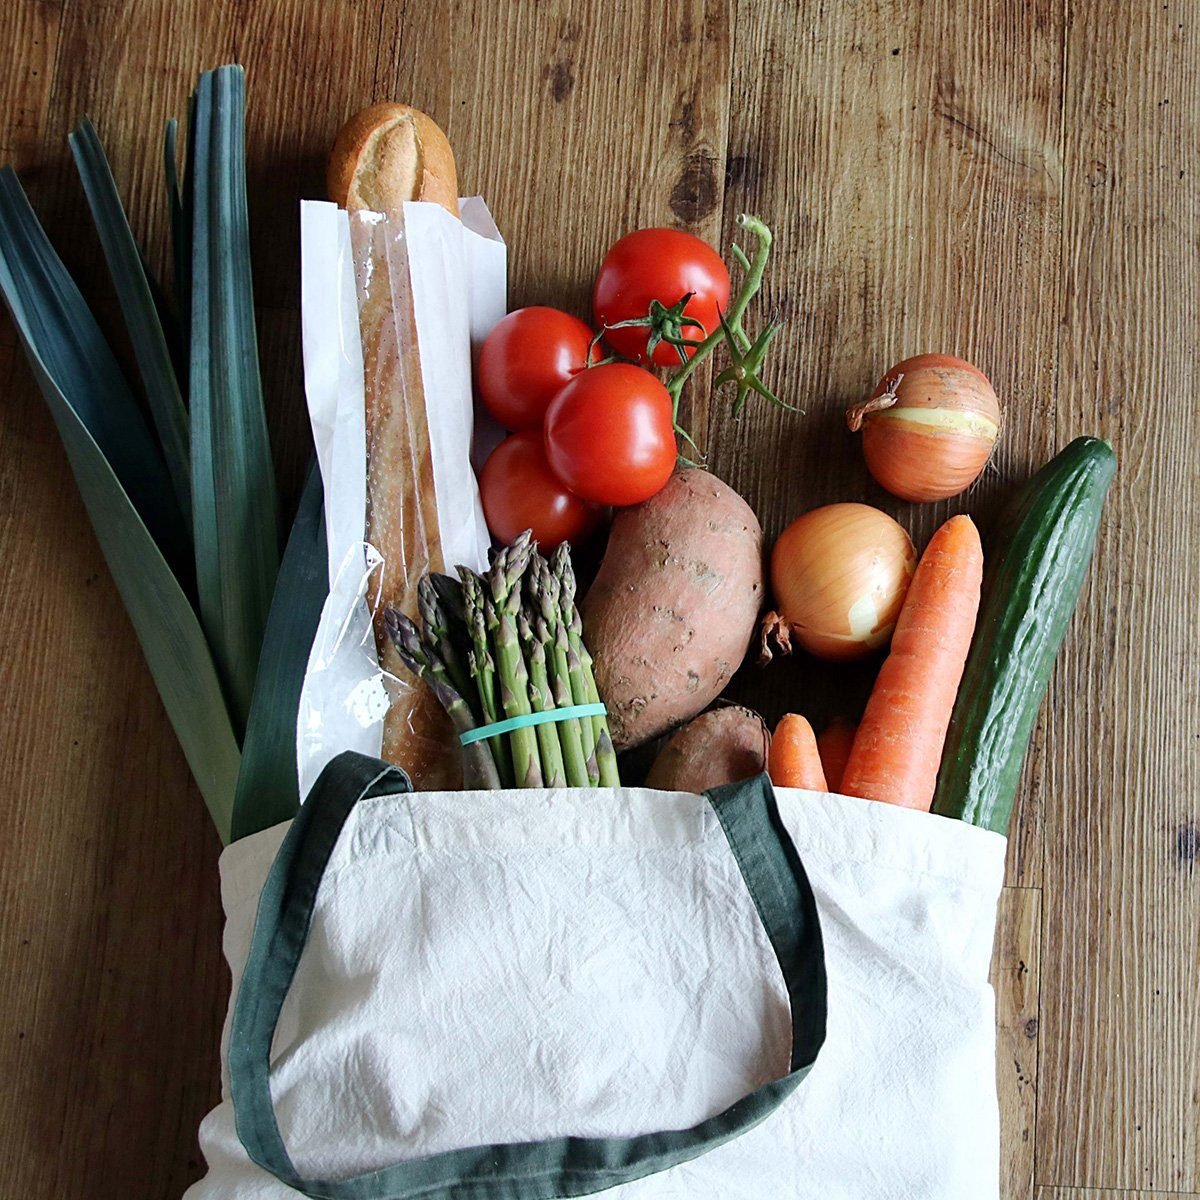 Grocery bag with produce